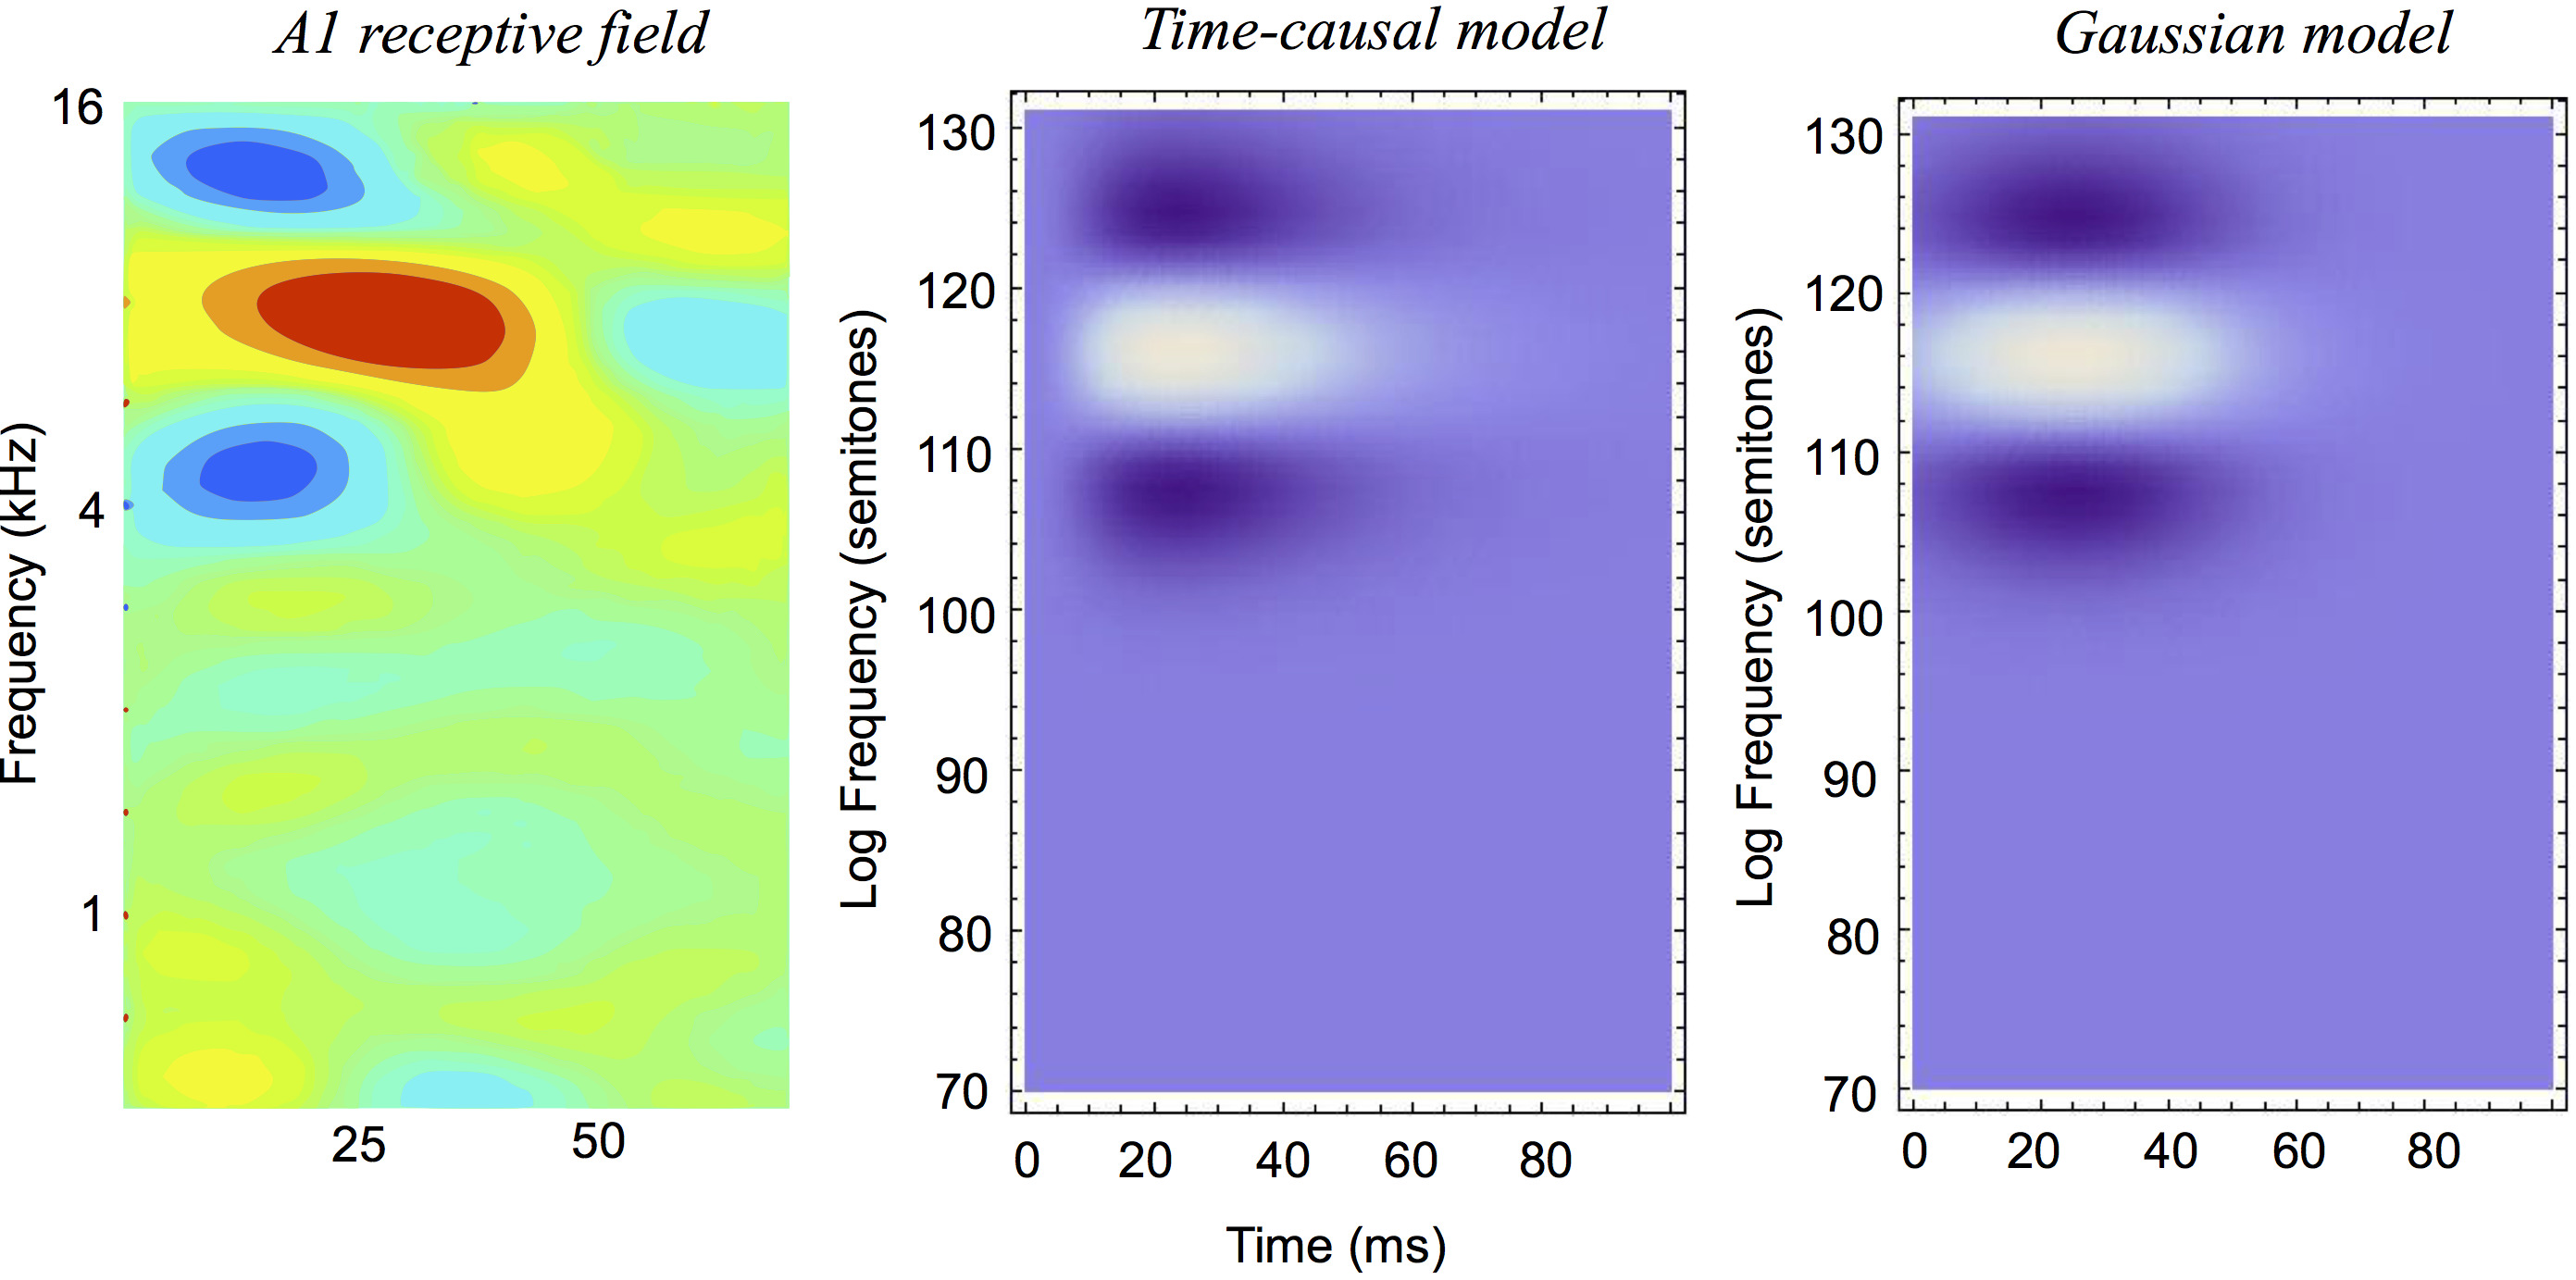 Figure 19 from Lindeberg and Friberg (2015) 'Idealized computational models of auditory receptive fields, PLOS ONE, 10(3):e0119032, pages 1-58.